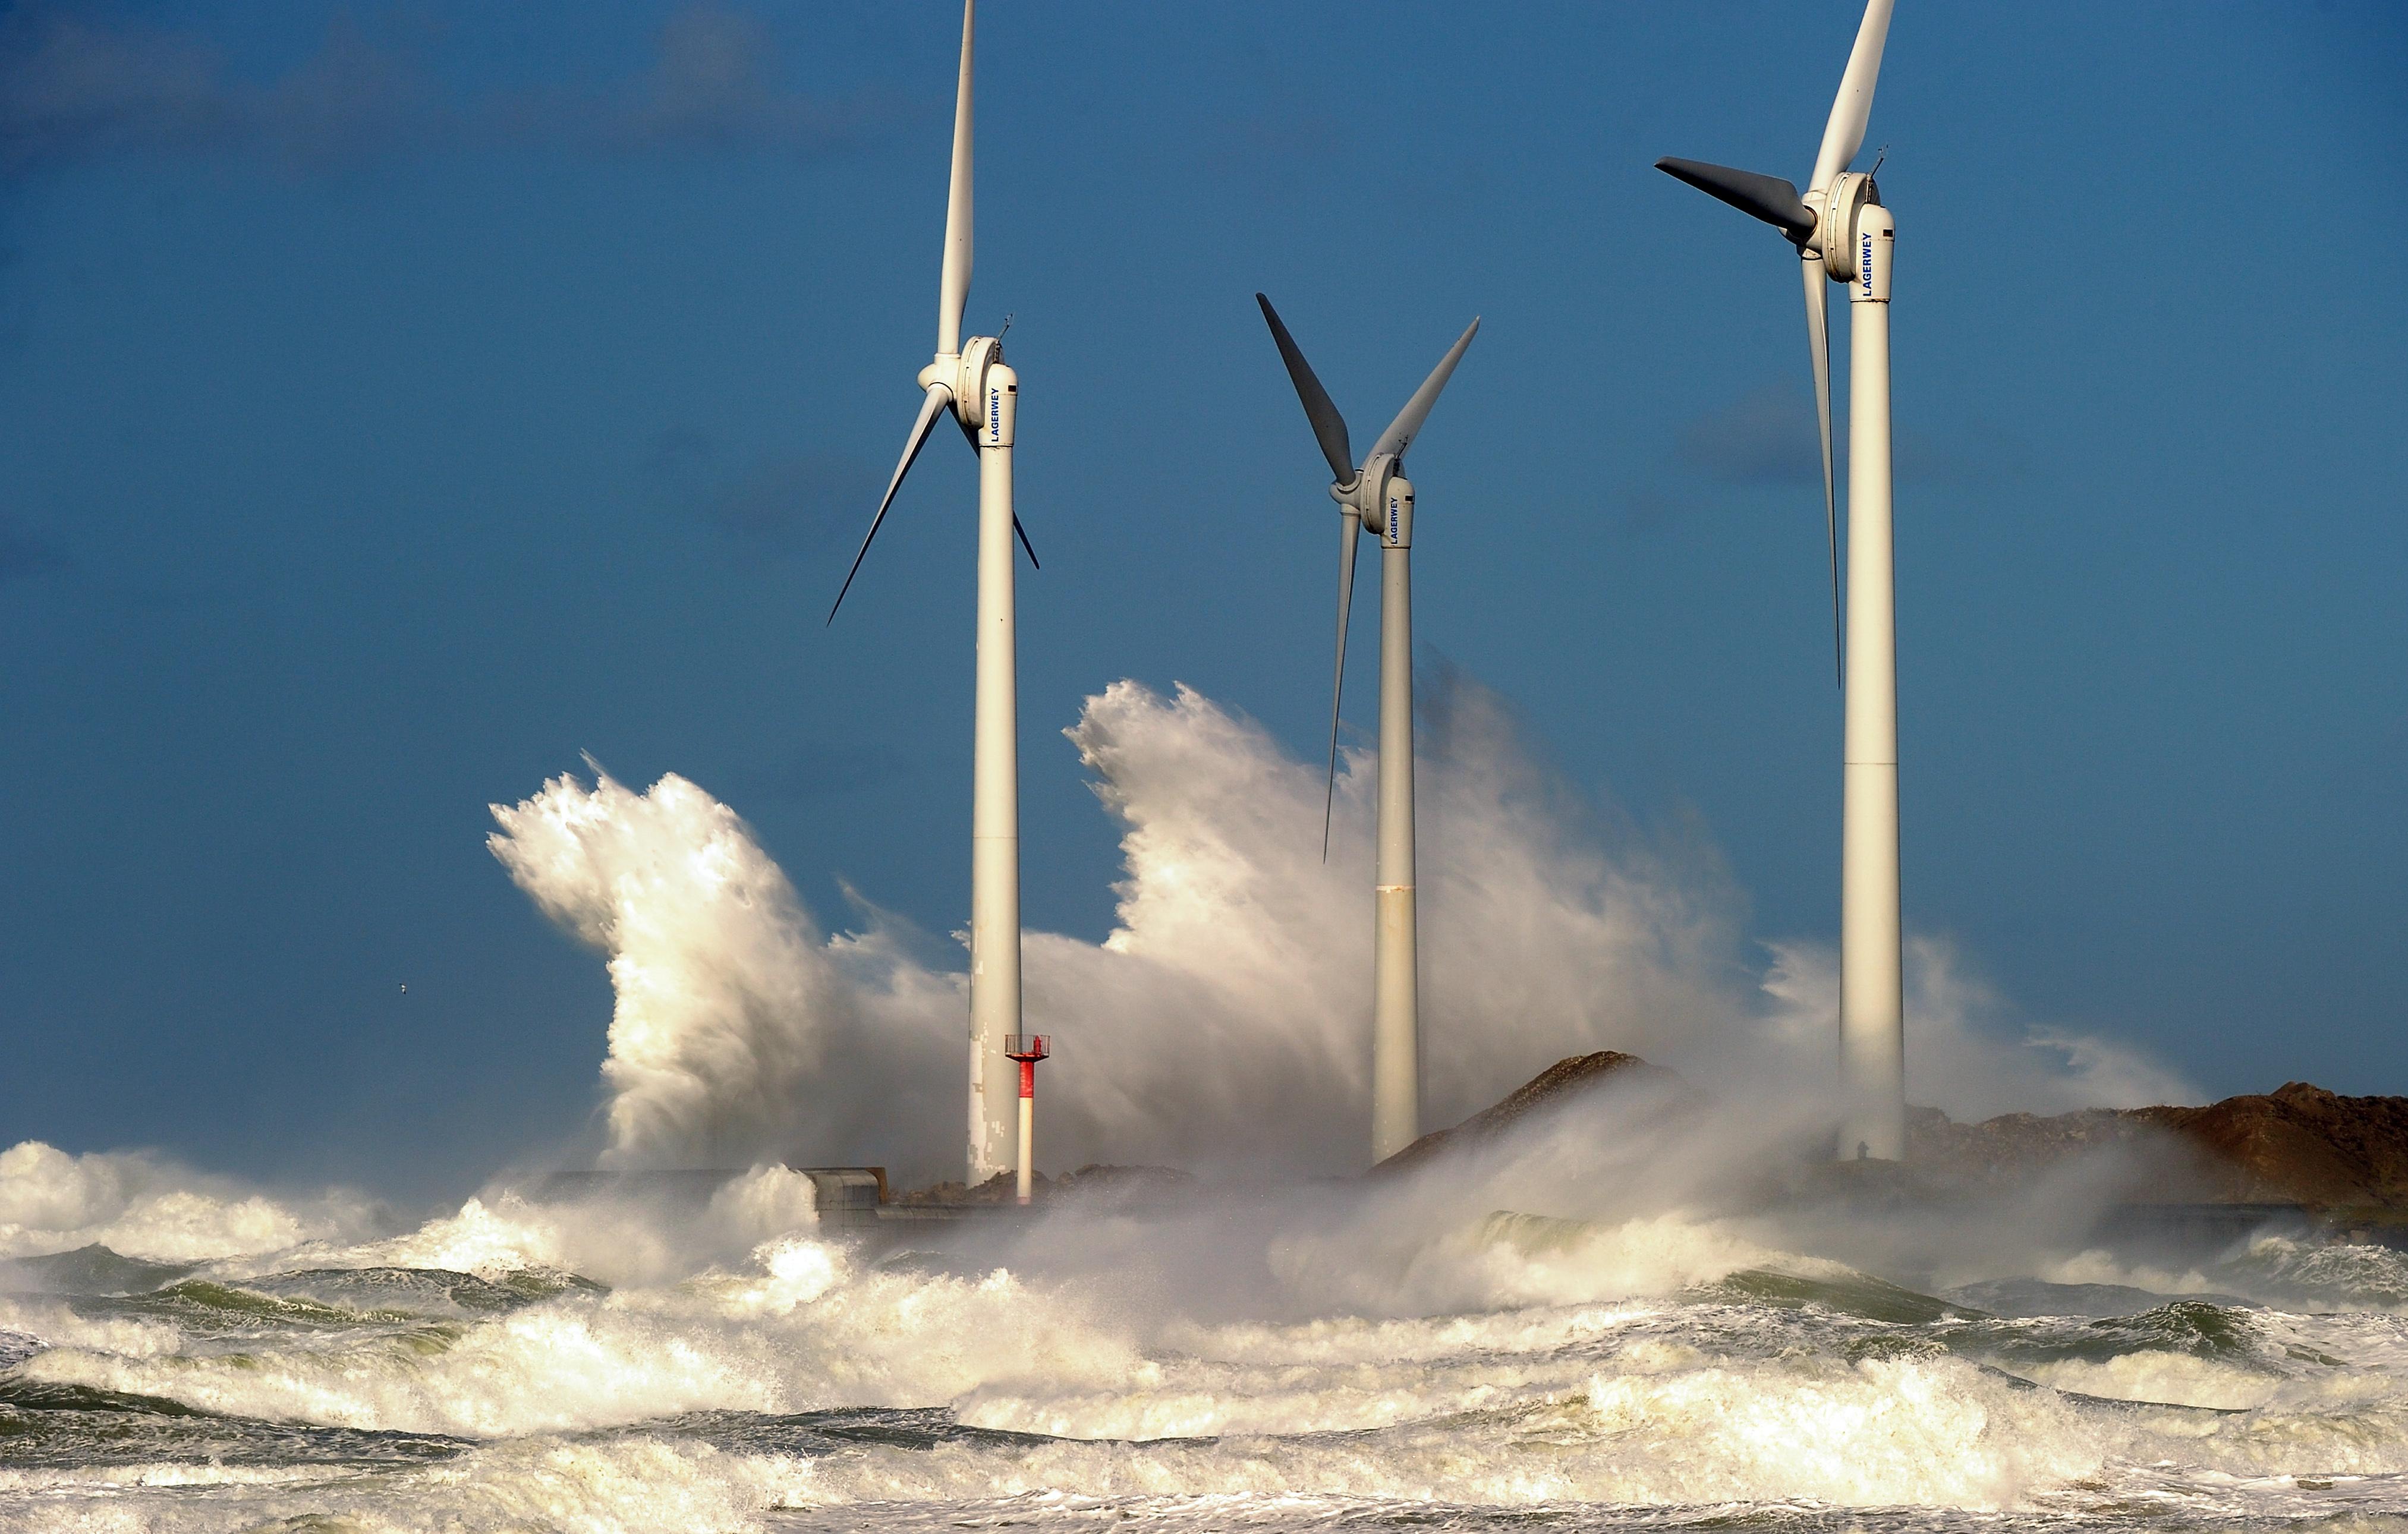 Waves break on a jetty holding wind turbines in the Channel port of Boulogne-sur-mer, France. 